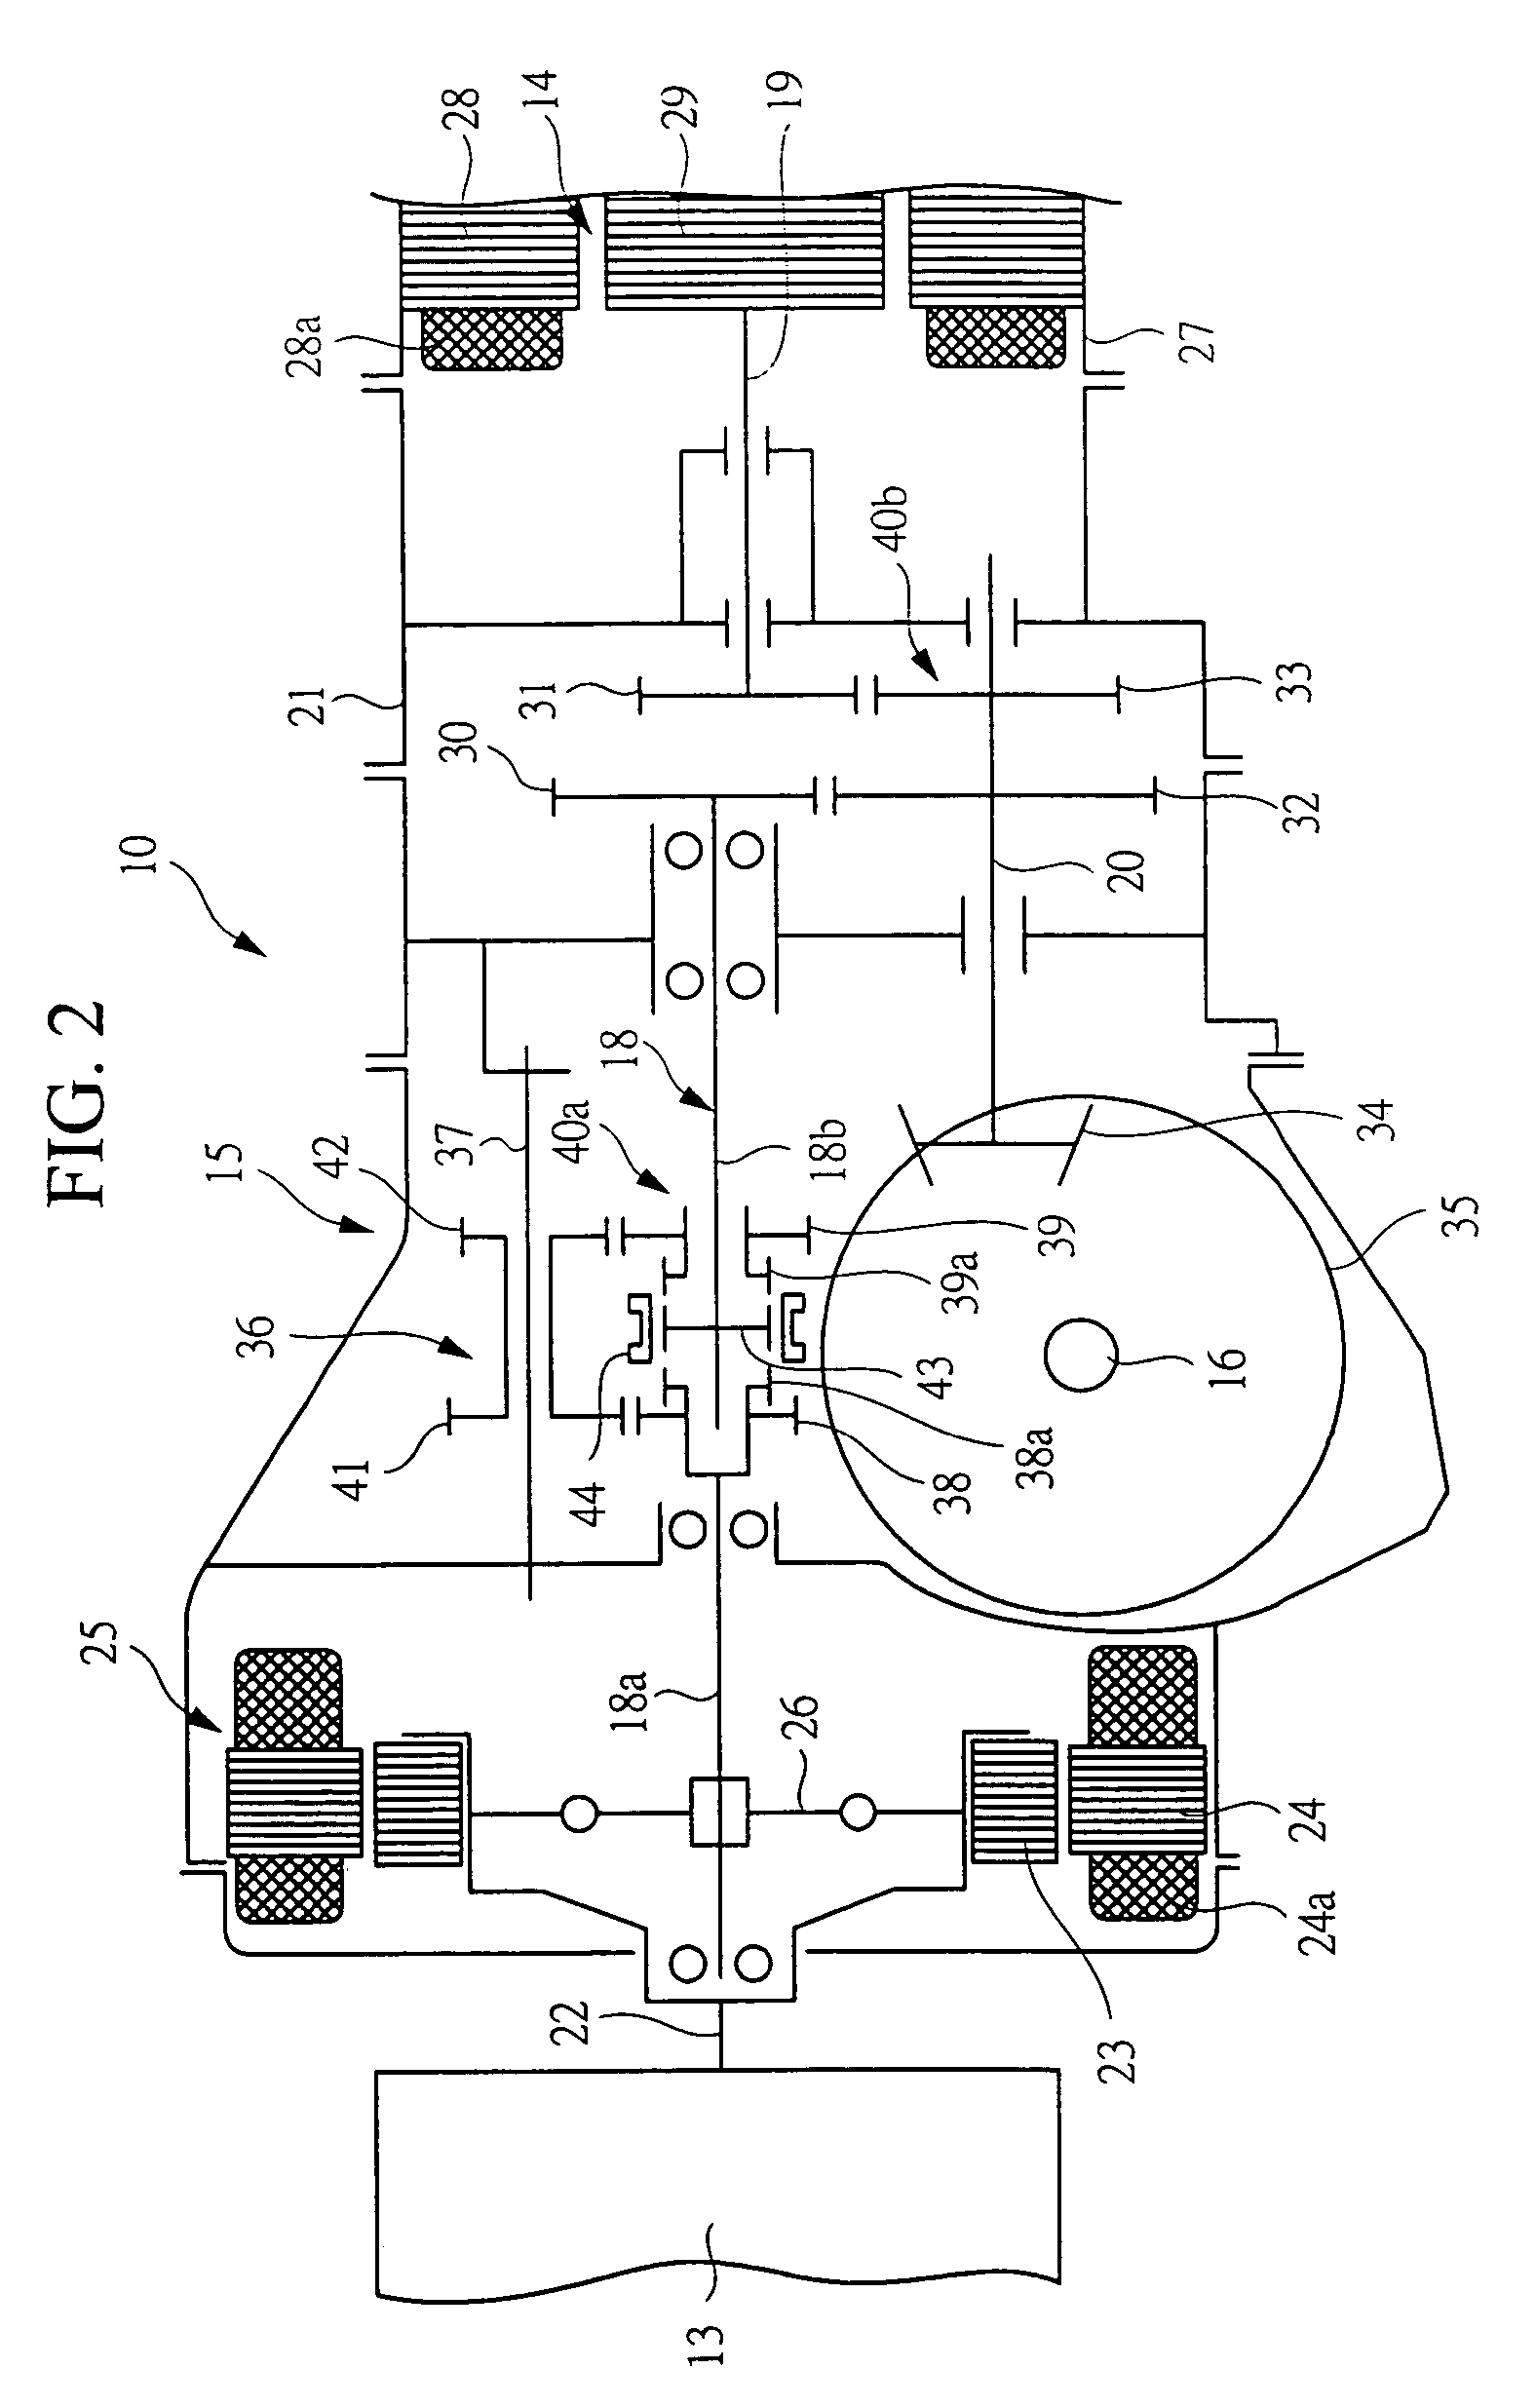 Driving apparatus for an electric vehicle